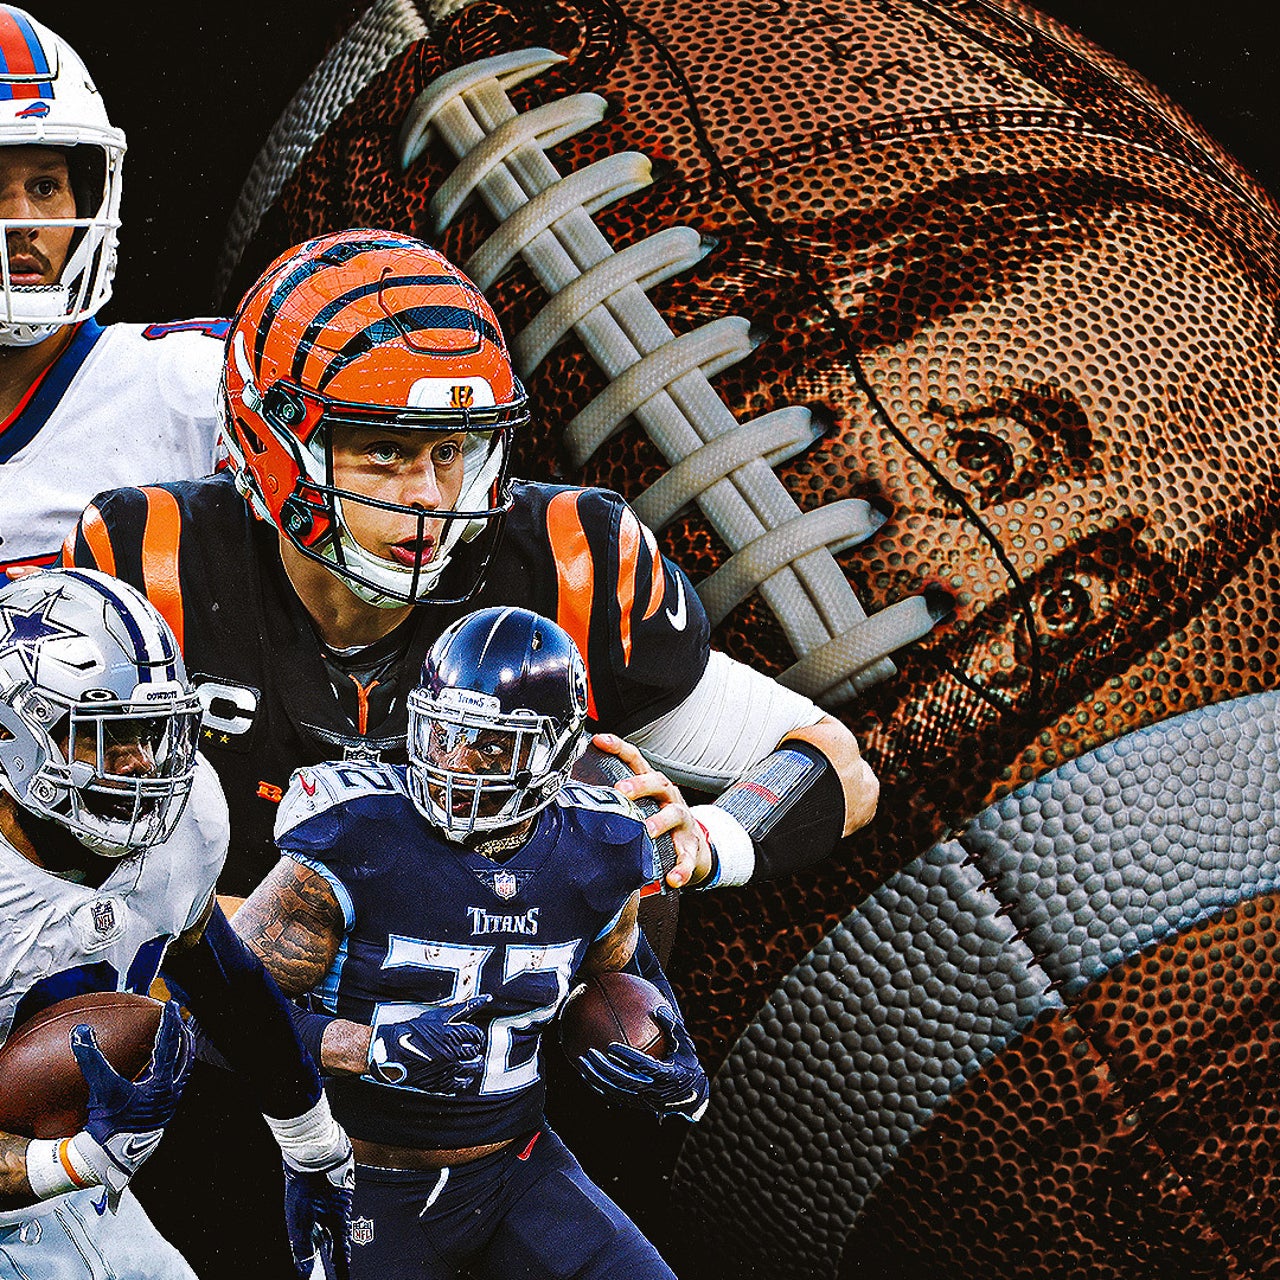 NFL Week 2 Odds, Moneylines & Point Spreads For Every Game